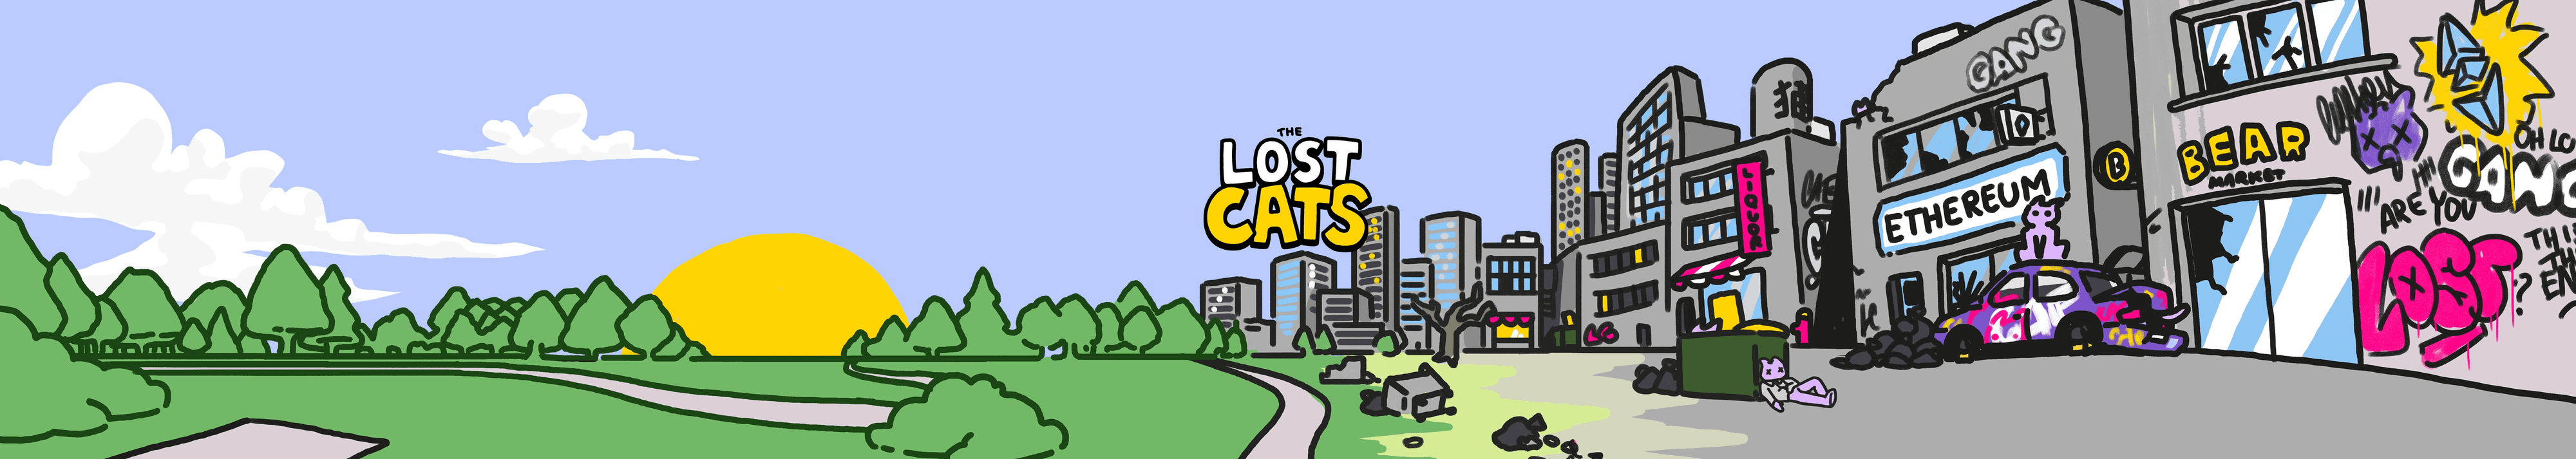 THE_LOST_CATS_VAULT 배너